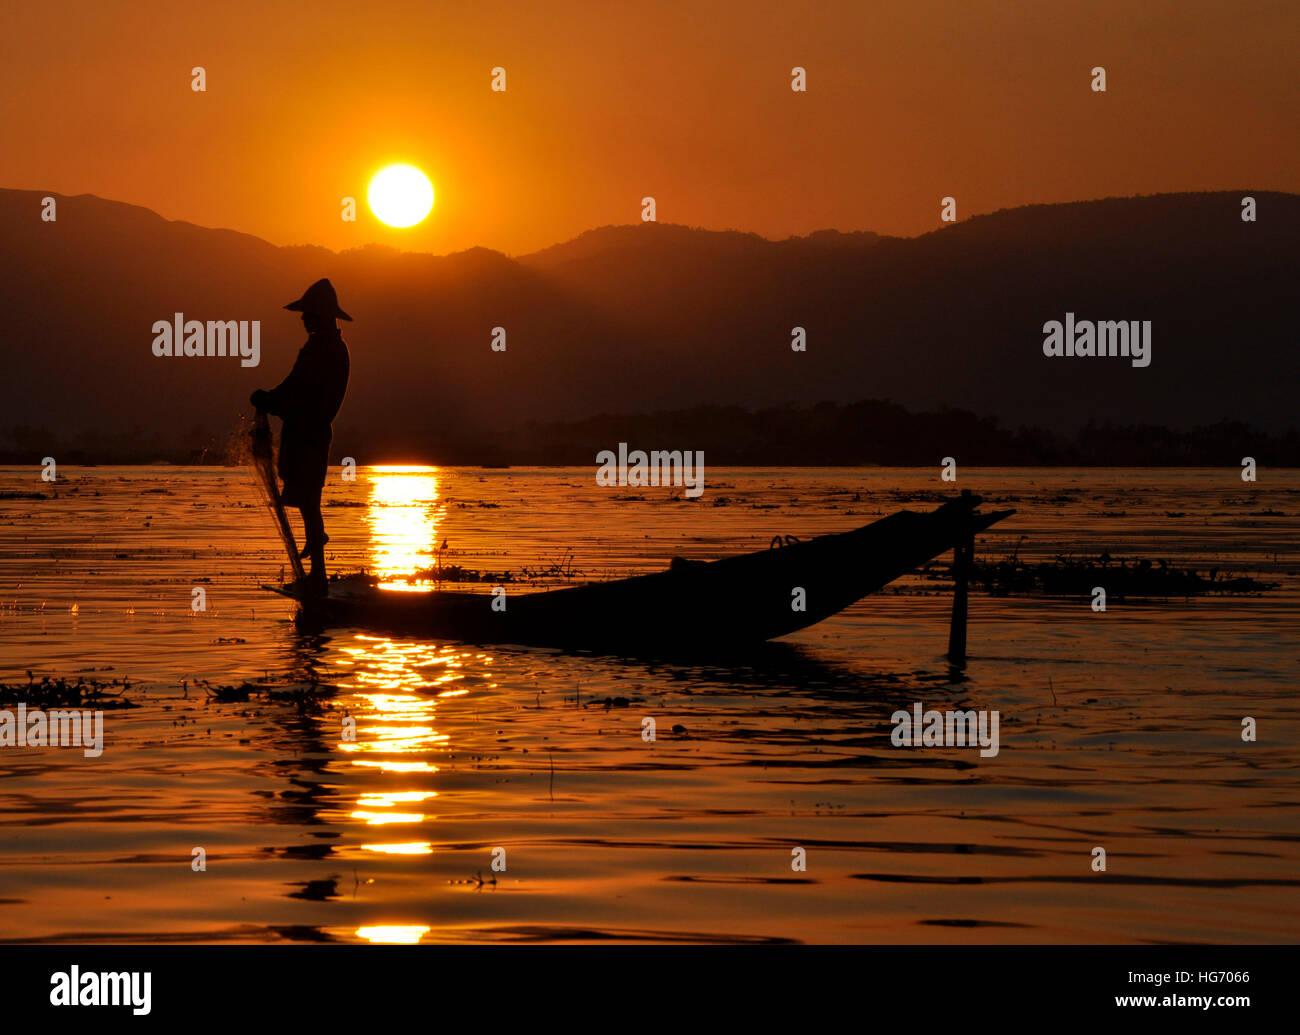 Silhouette of a fisherman in the sunset at Inle lake in Burma Stock Photo